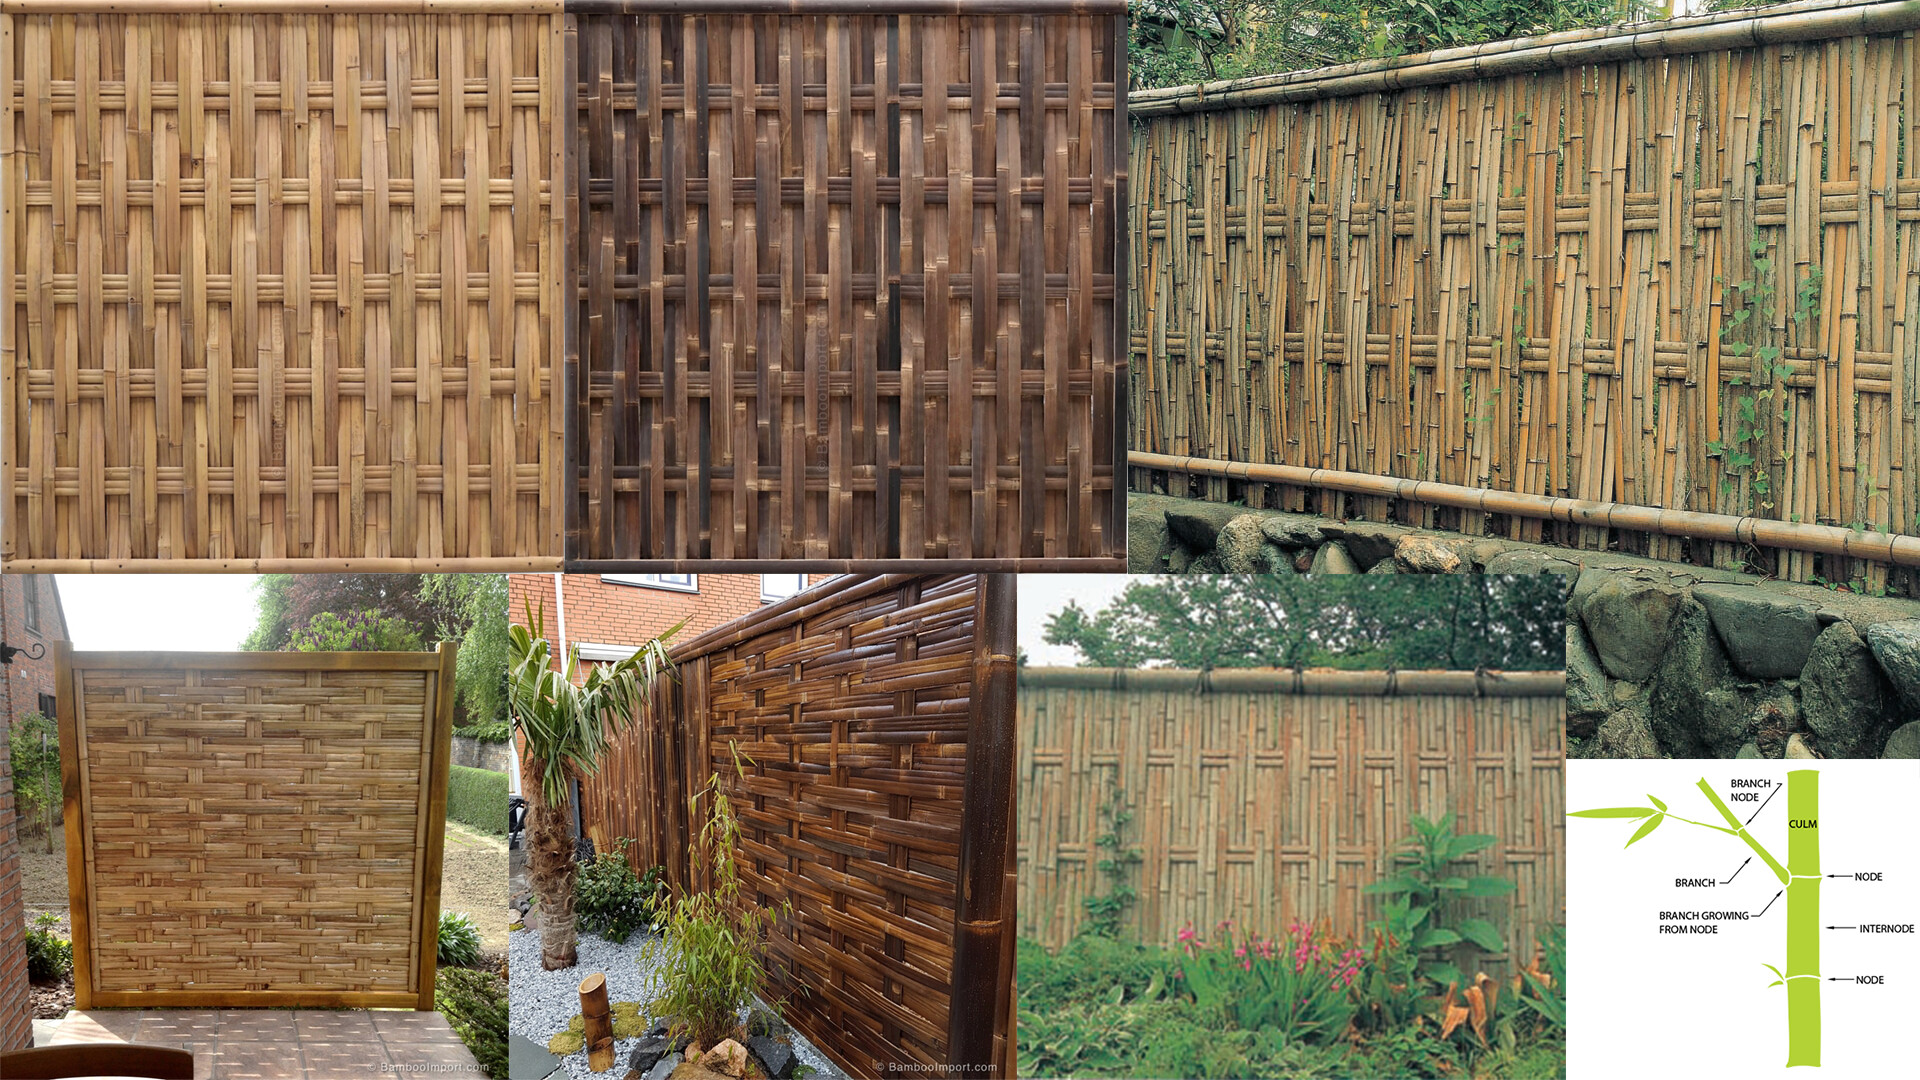 Image of Woven bamboo fence